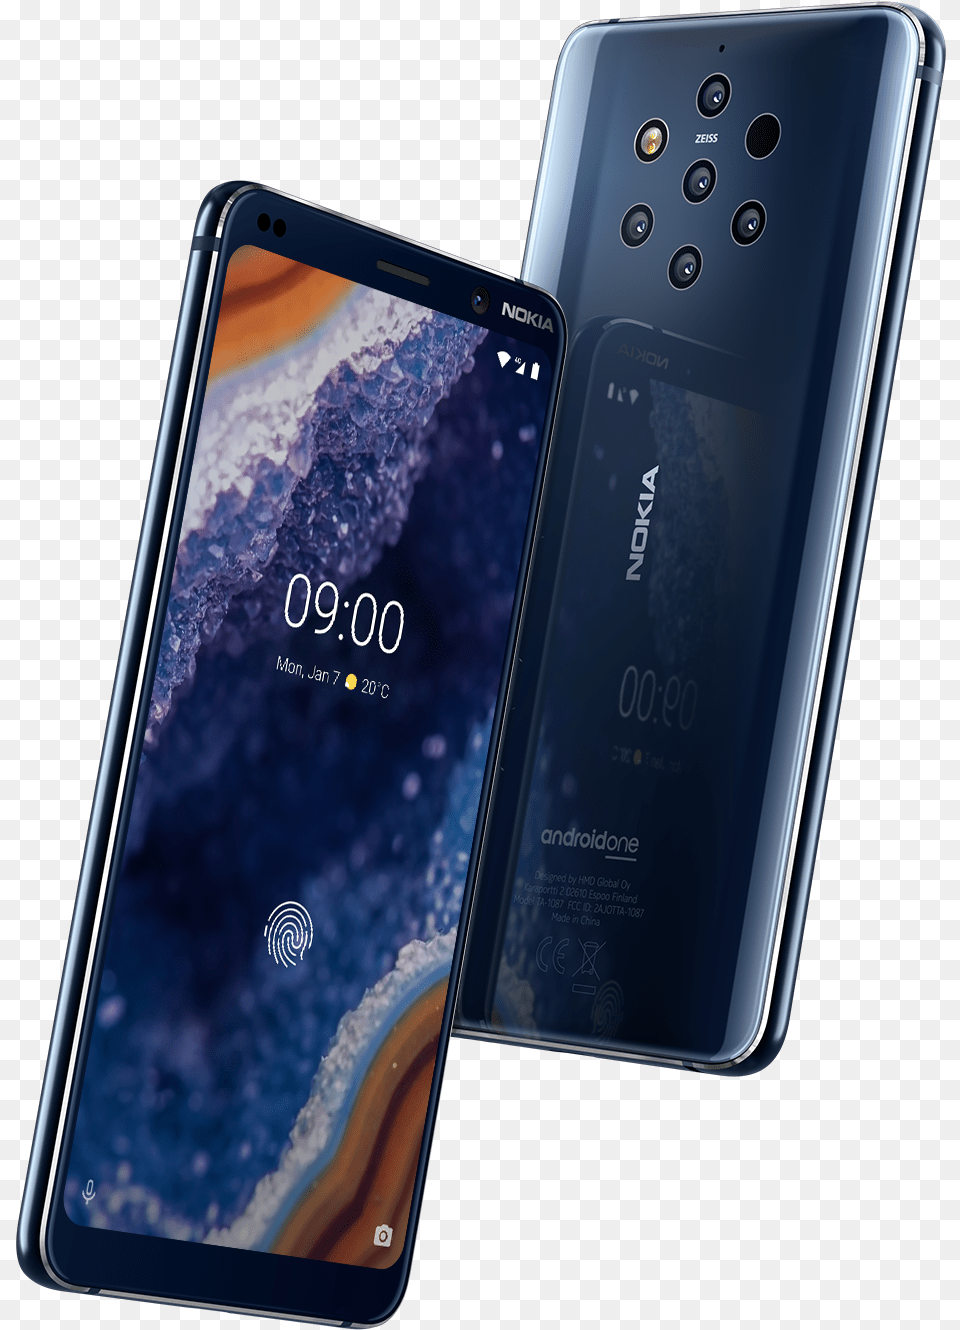 Hmd Global The Home Of Nokia Phones Today Announced Nokia 9 Pureview, Electronics, Mobile Phone, Phone Png Image